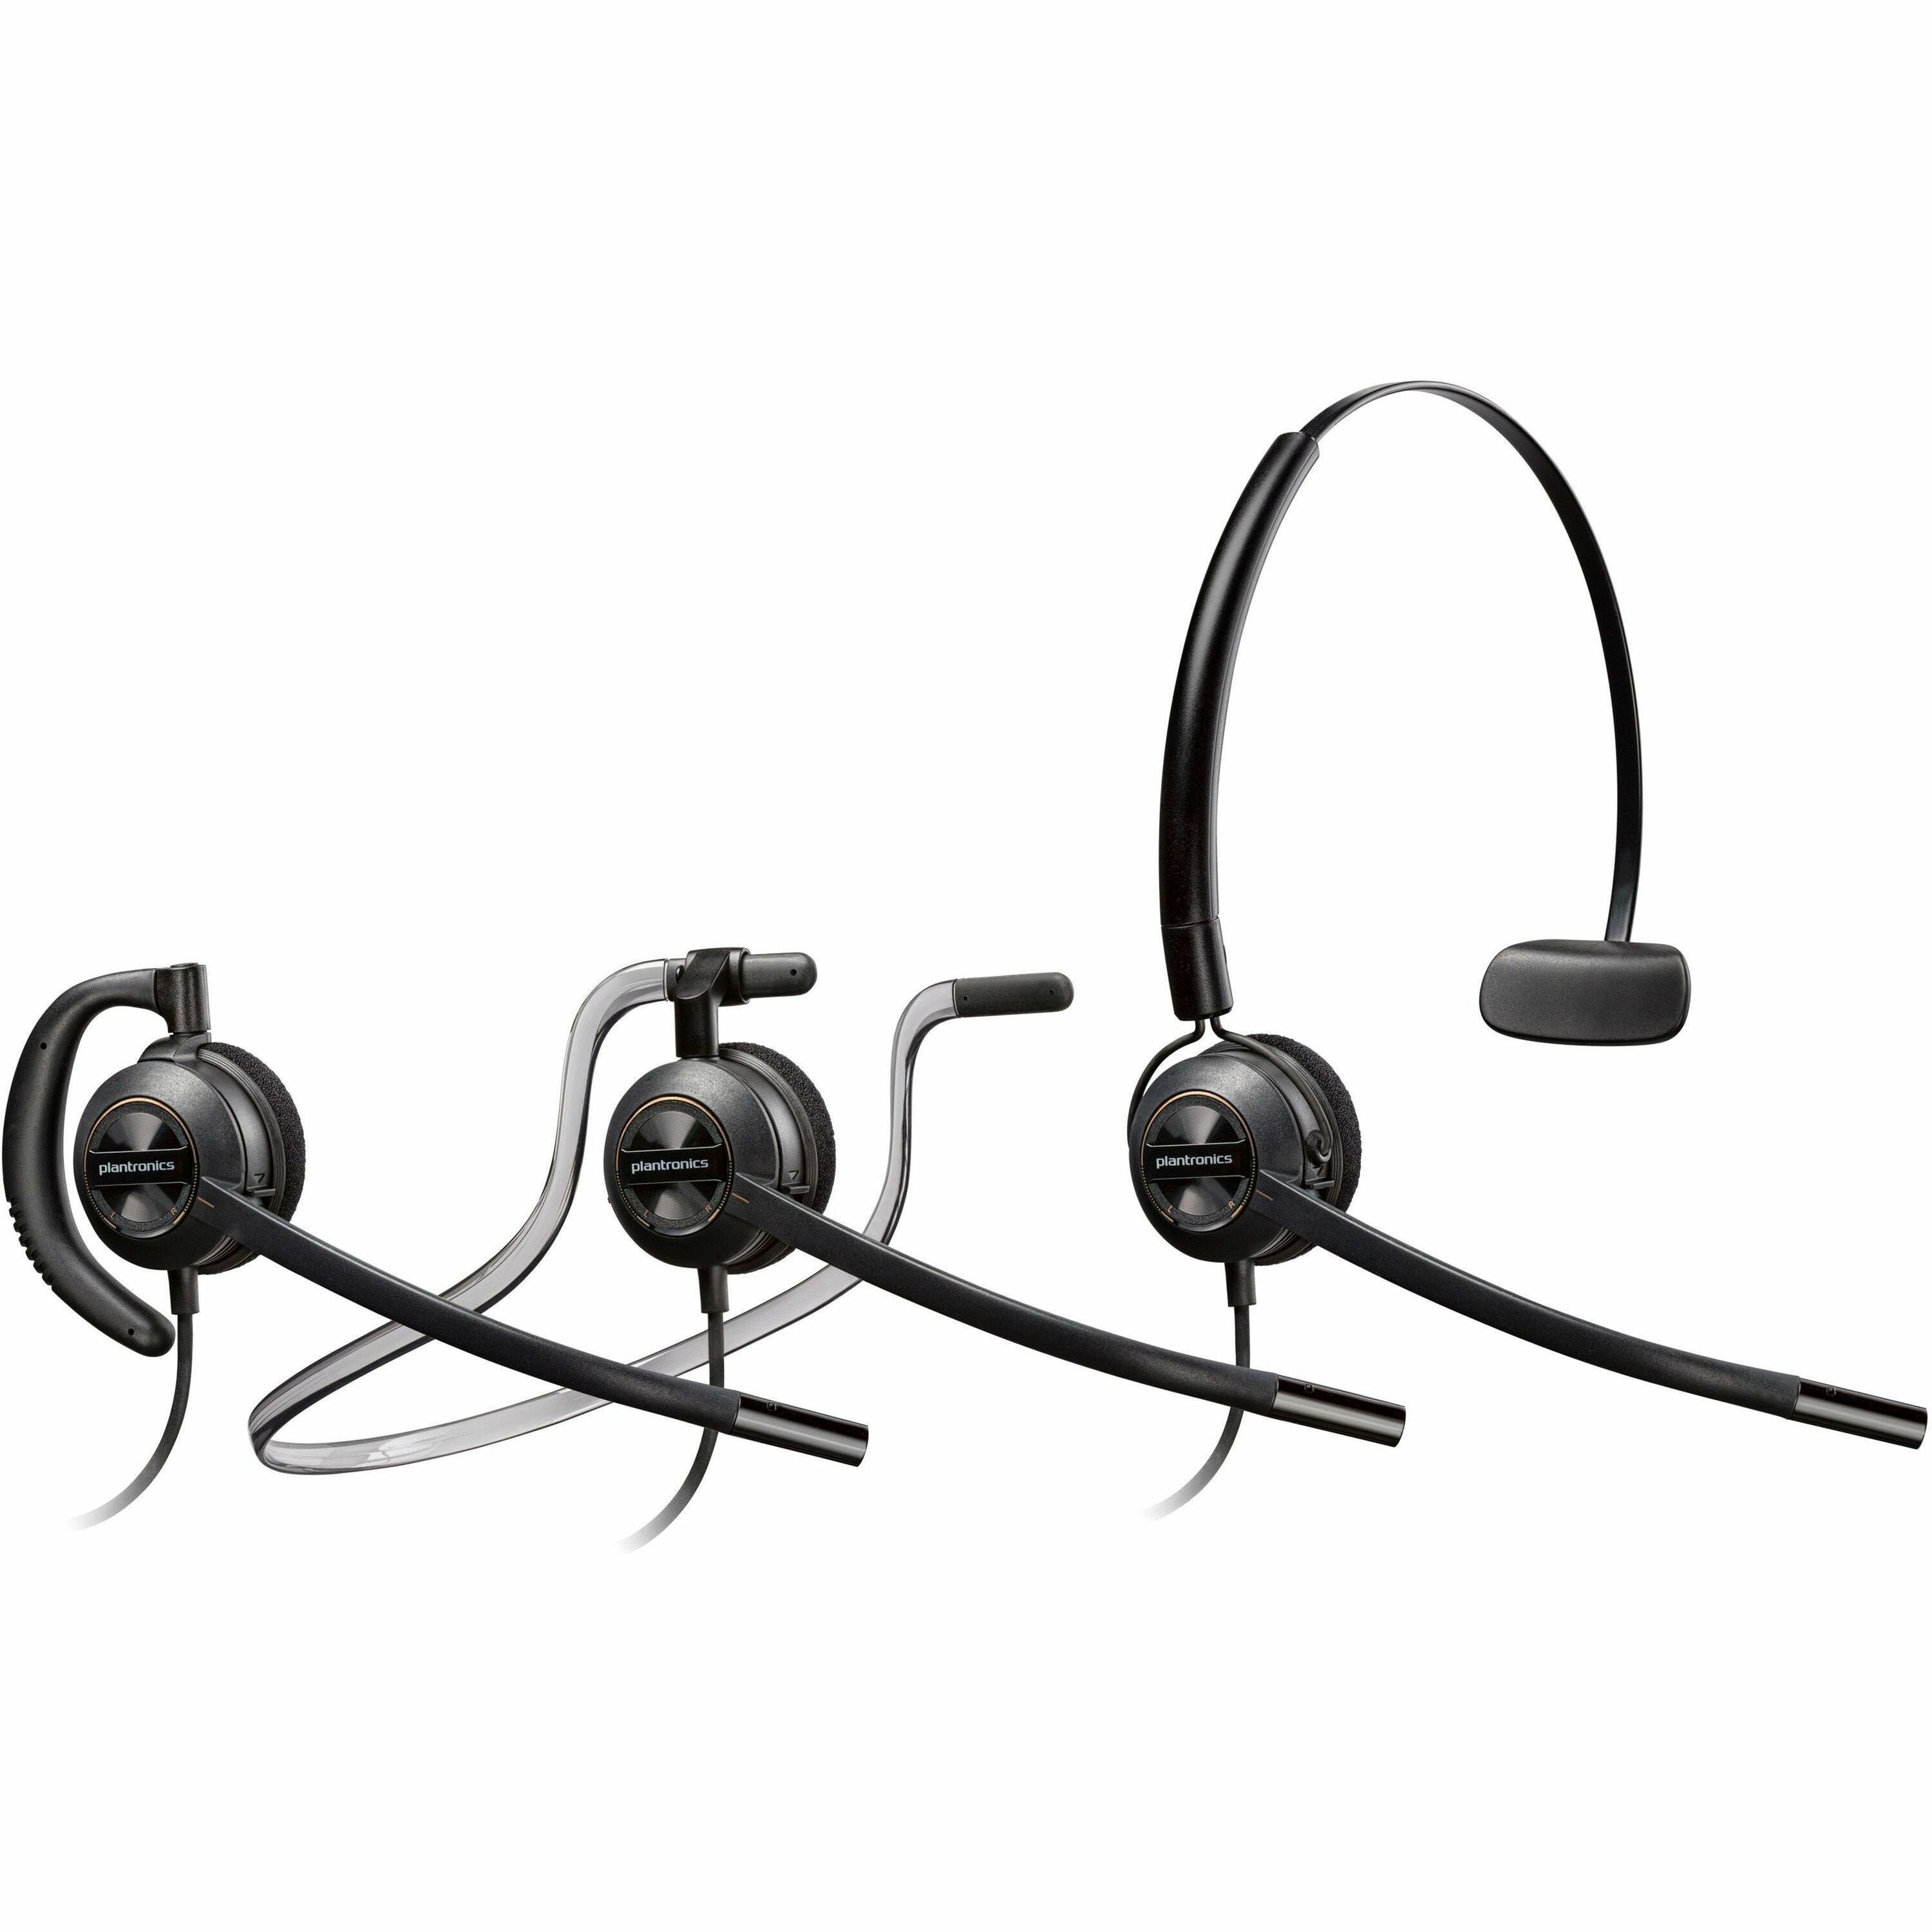 Poly EncorePro HW540 Convertible Headset - Mono - Mini-phone (3.5mm) - Wired - 20 Hz - 16 kHz - On-ear - Monaural - Ear-cup - 2.92 ft Cable - Omni-directional, Noise Cancelling Microphone - Black - 1